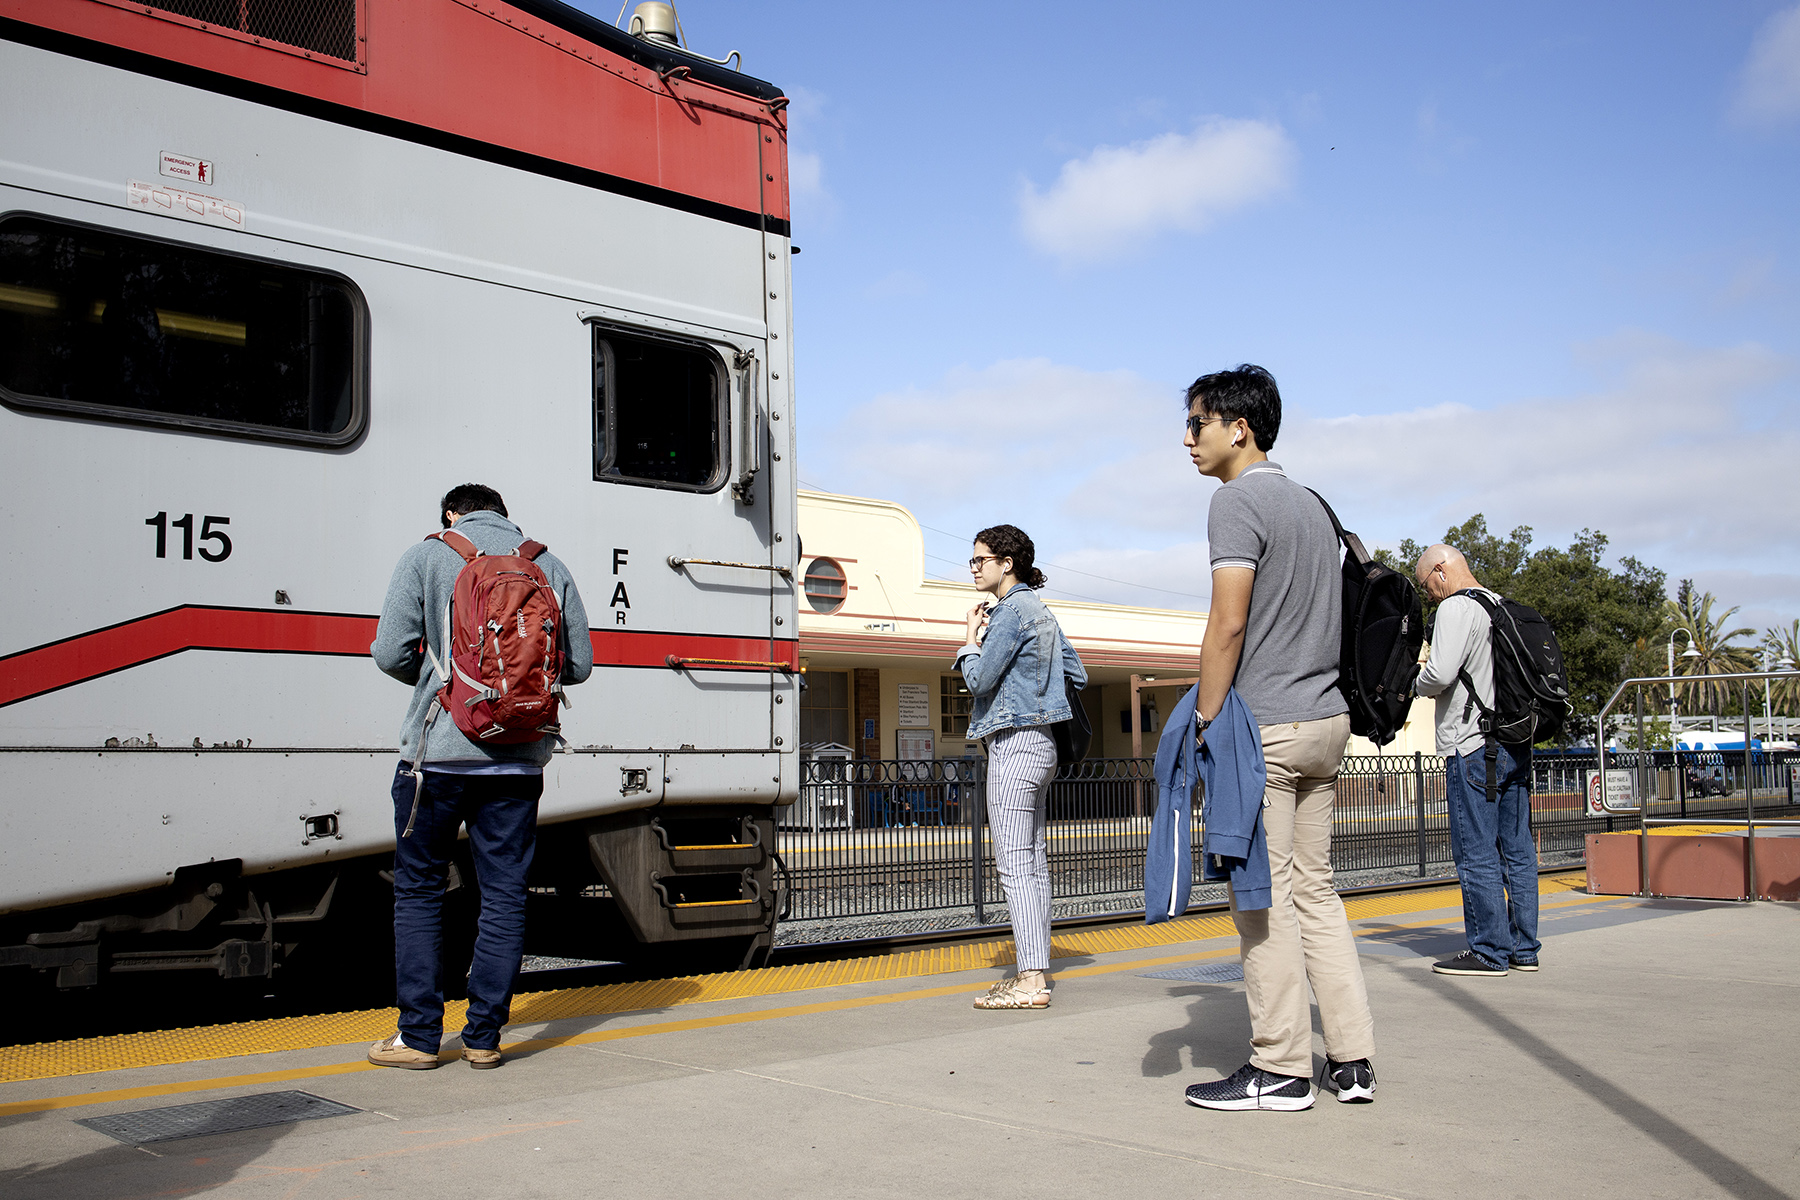 Commuters wait to catch a Northbound train at the Palo Alto Transit Center in Palo Alto, Calif., on June 21, 2019. Palo Alto is the second-busiest Caltrain station after San Francisco, averaging 7,764 weekday boardings by a 2018 count.